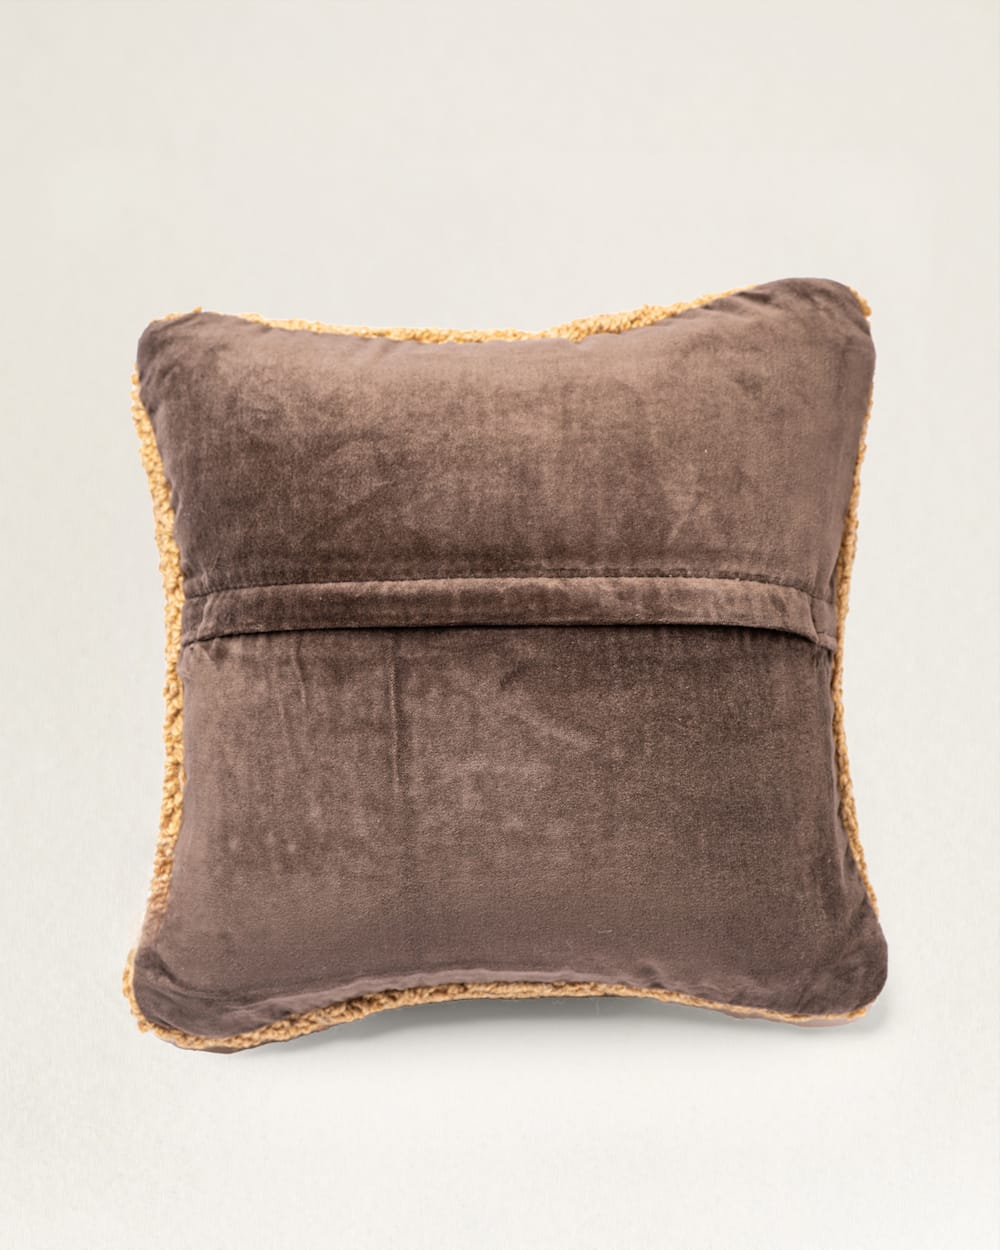 ALTERNATE VIEW OF BUFFALO HOOKED SQUARE PILLOW IN BROWN/GOLD image number 2